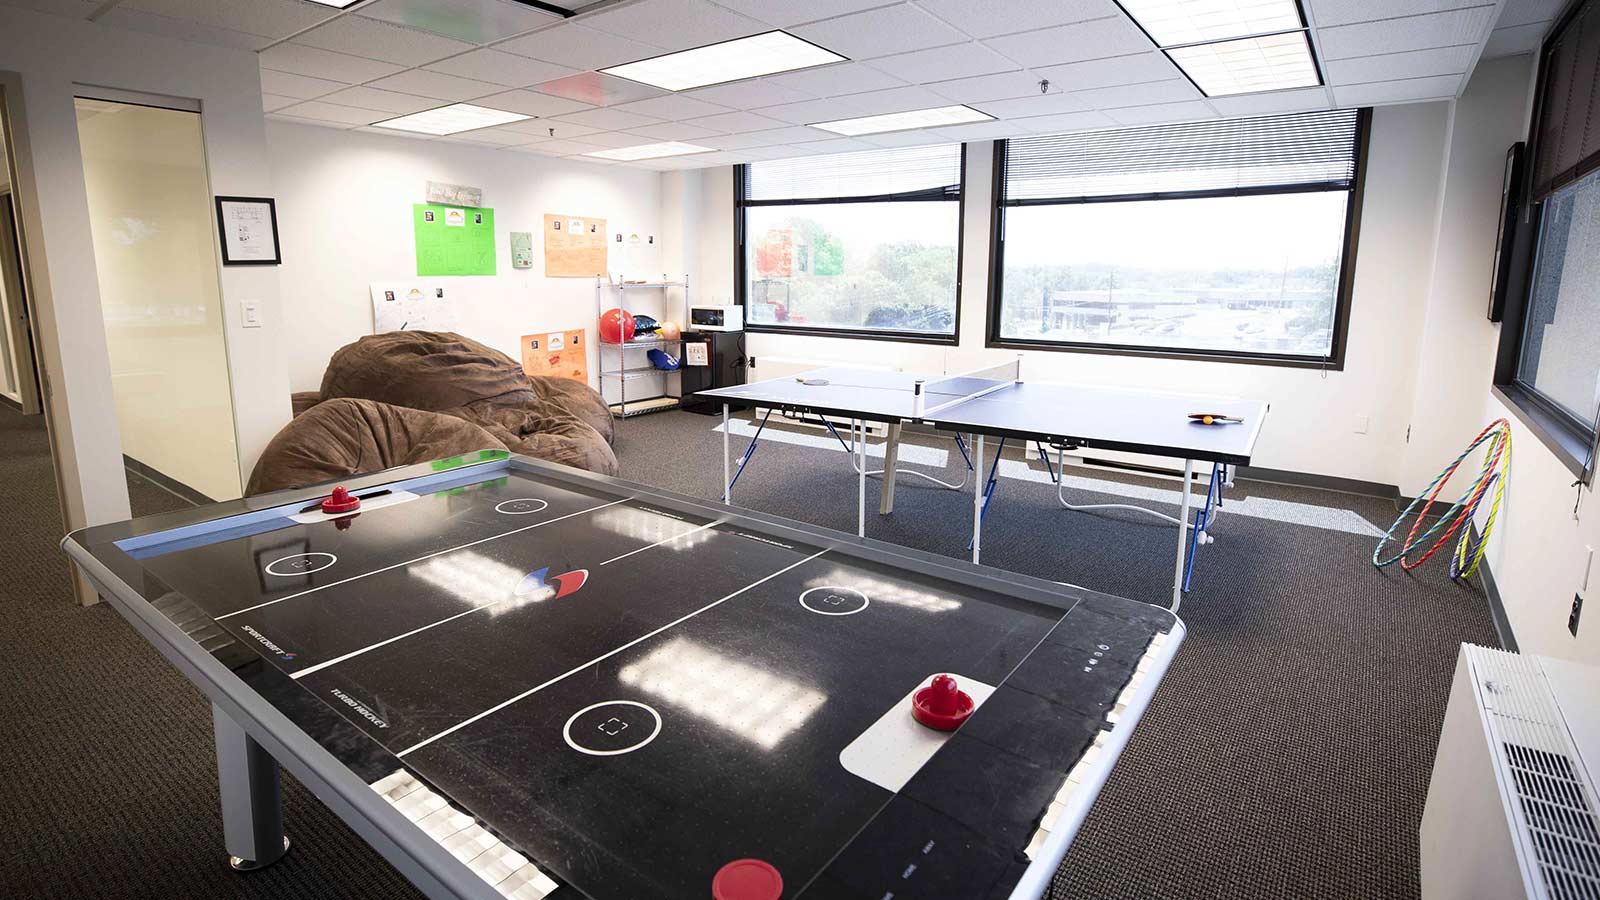 An activity room with an air hockey table and other recreational items, with large windows.